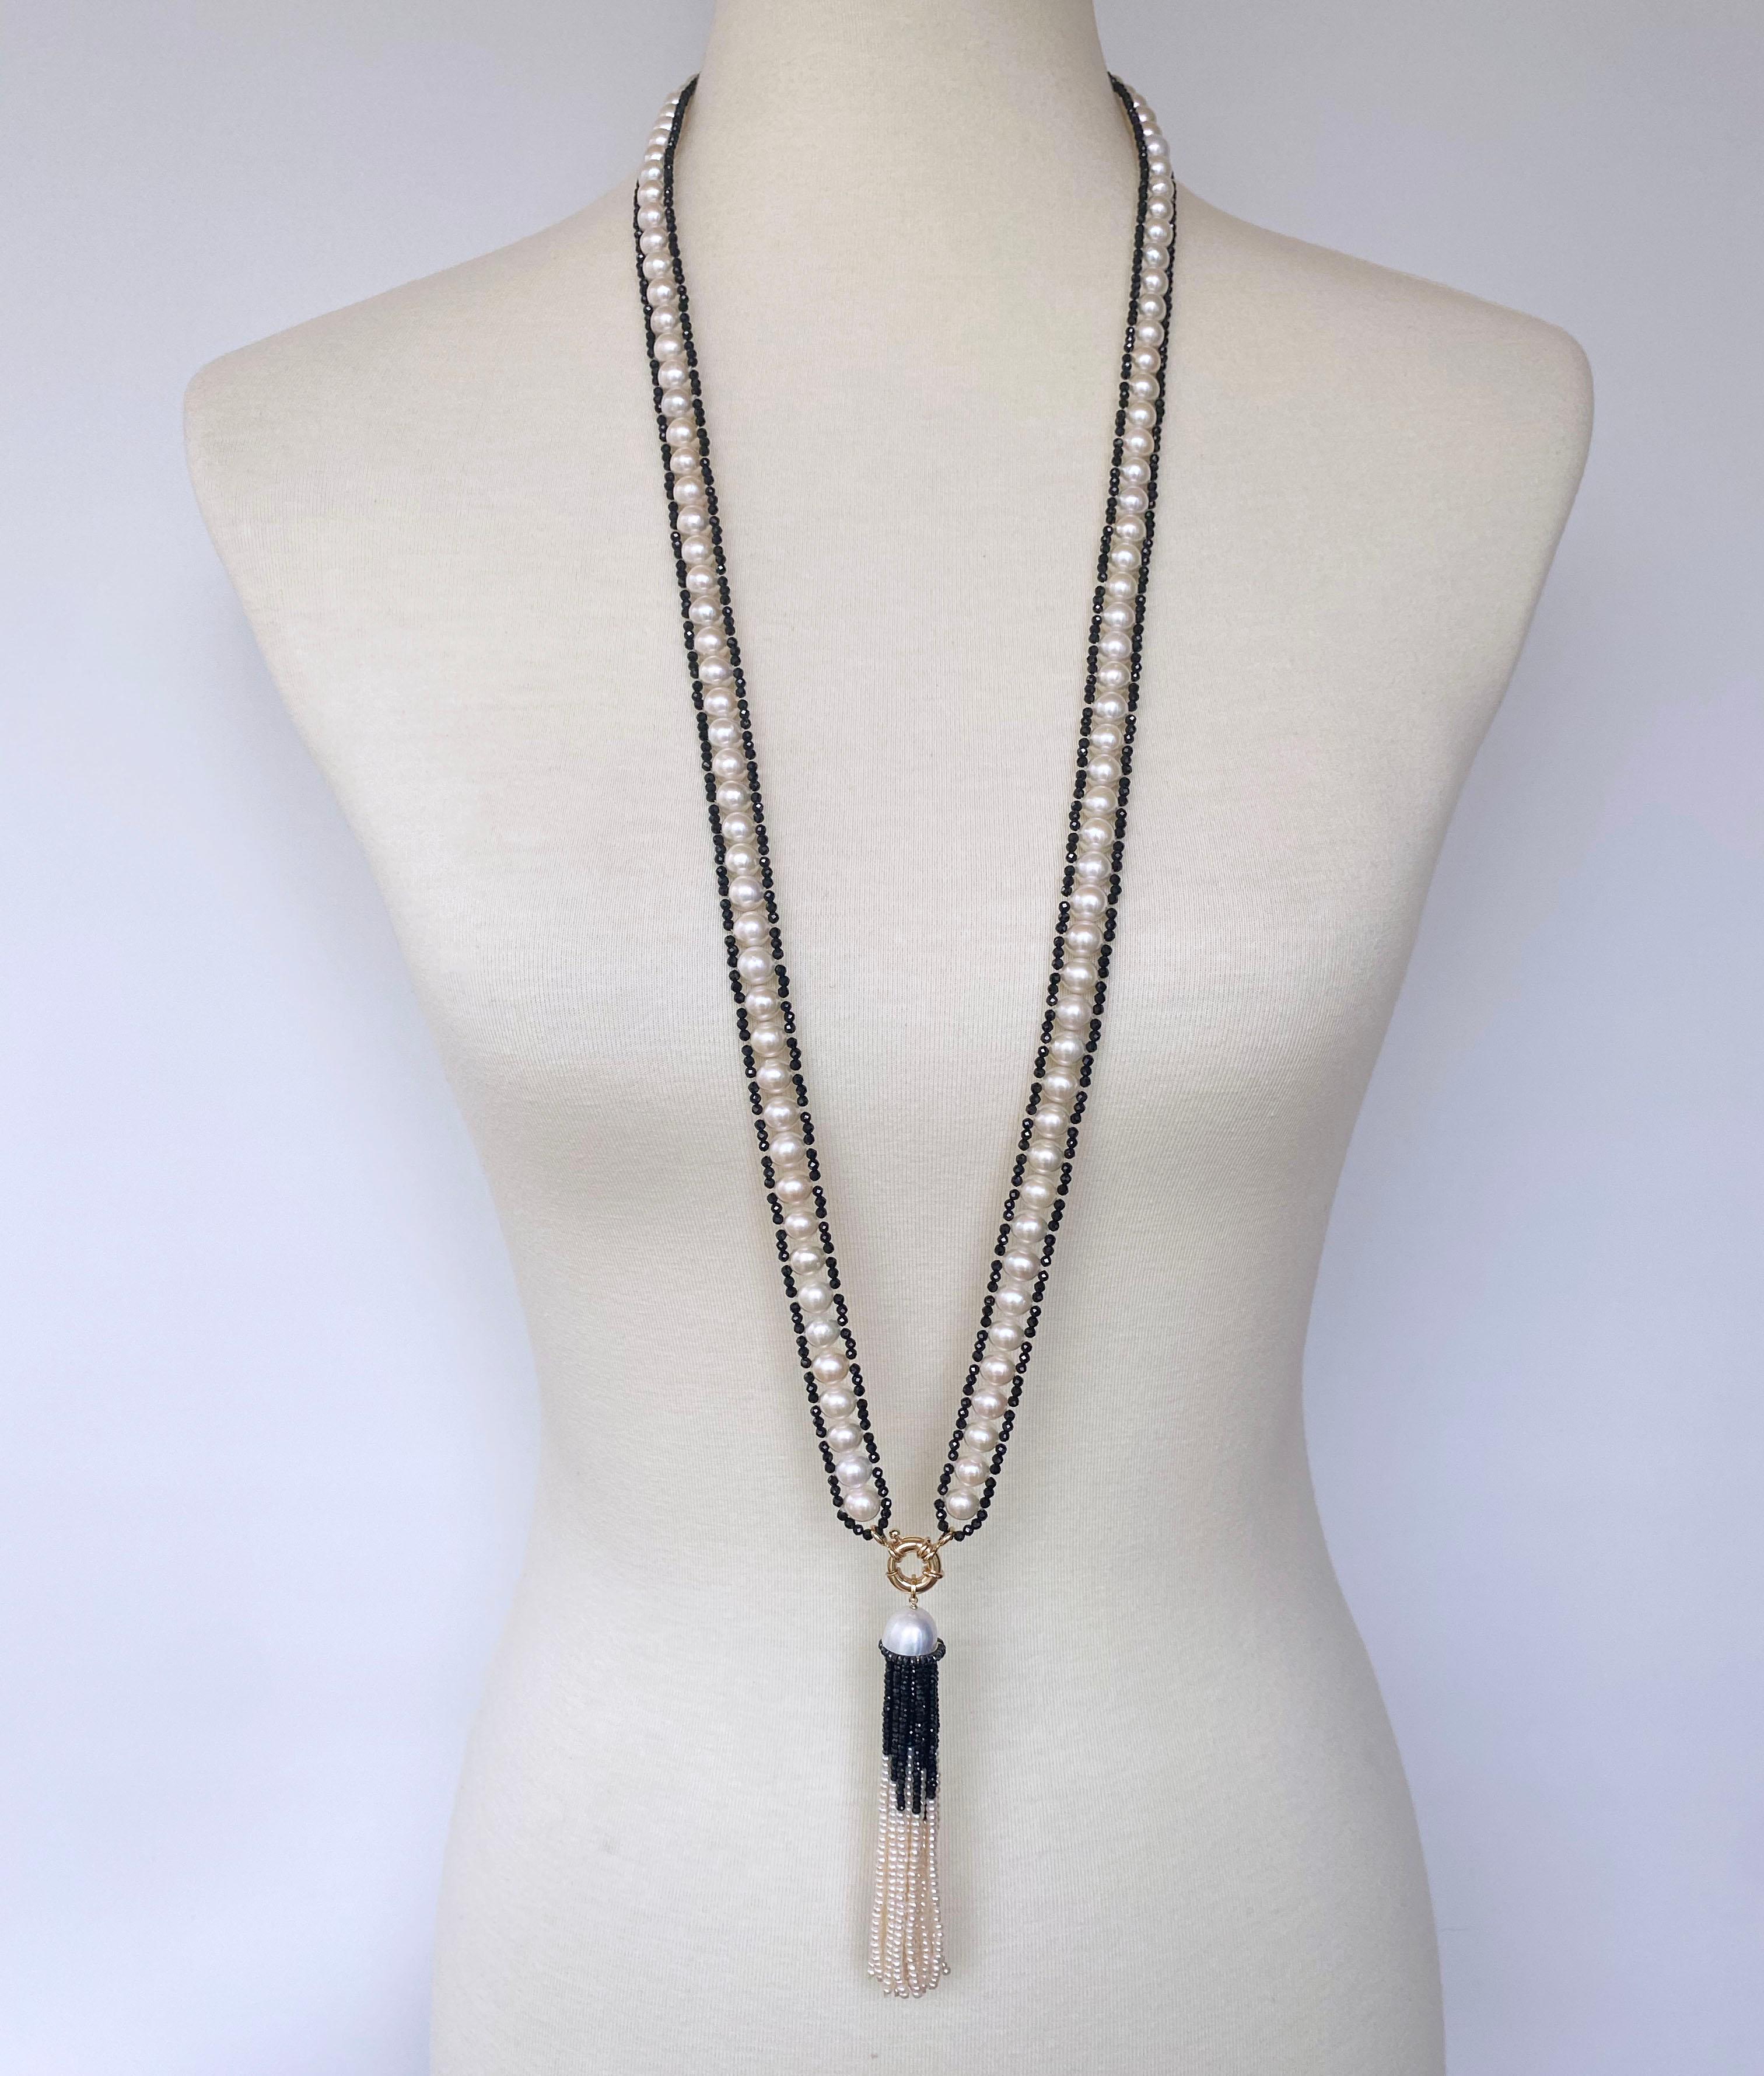 Beautiful Satuoir handmade by Marina J. in Los Angeles. This amazing piece features real White Pearls (8mm) which display a great iridescent sheen, woven together and adorned with faceted Black Spinel. Measuring 39 inches sans Tassel, this versitile